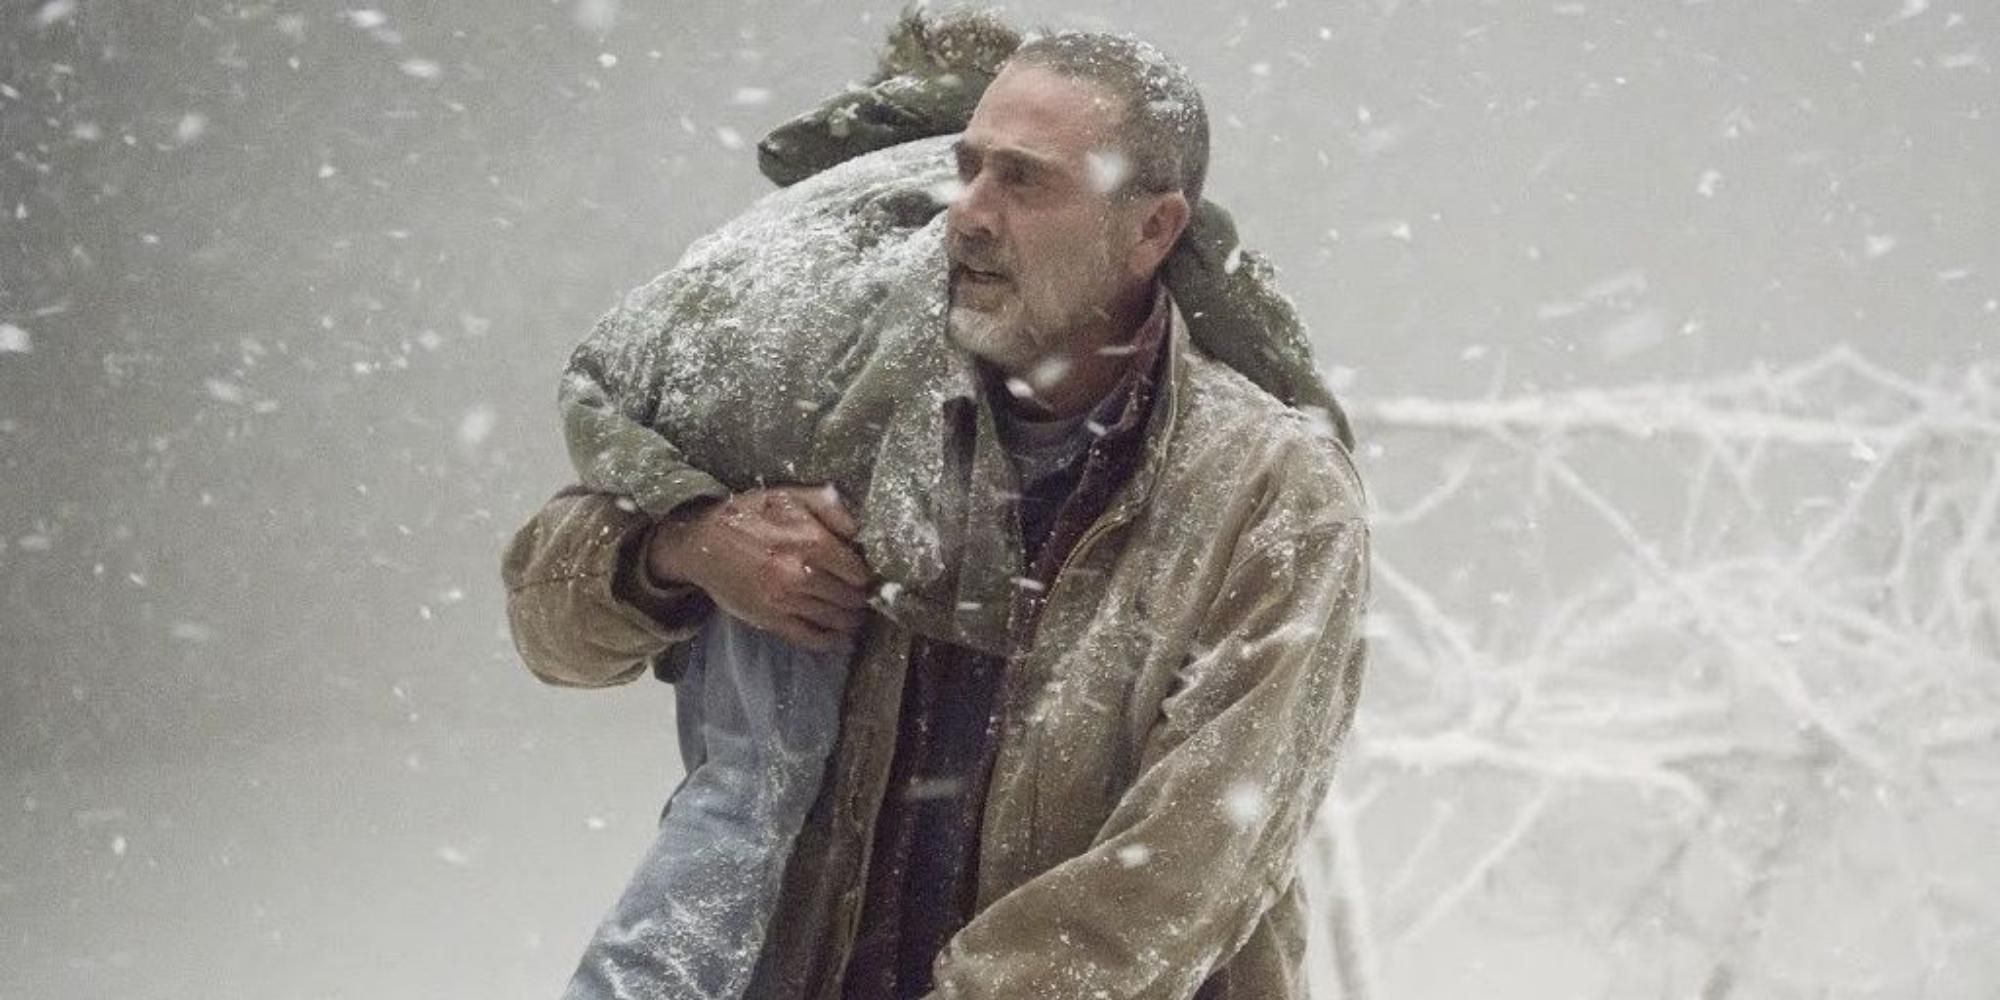 Negan saves Judith from a snow storm in The Walking Dead